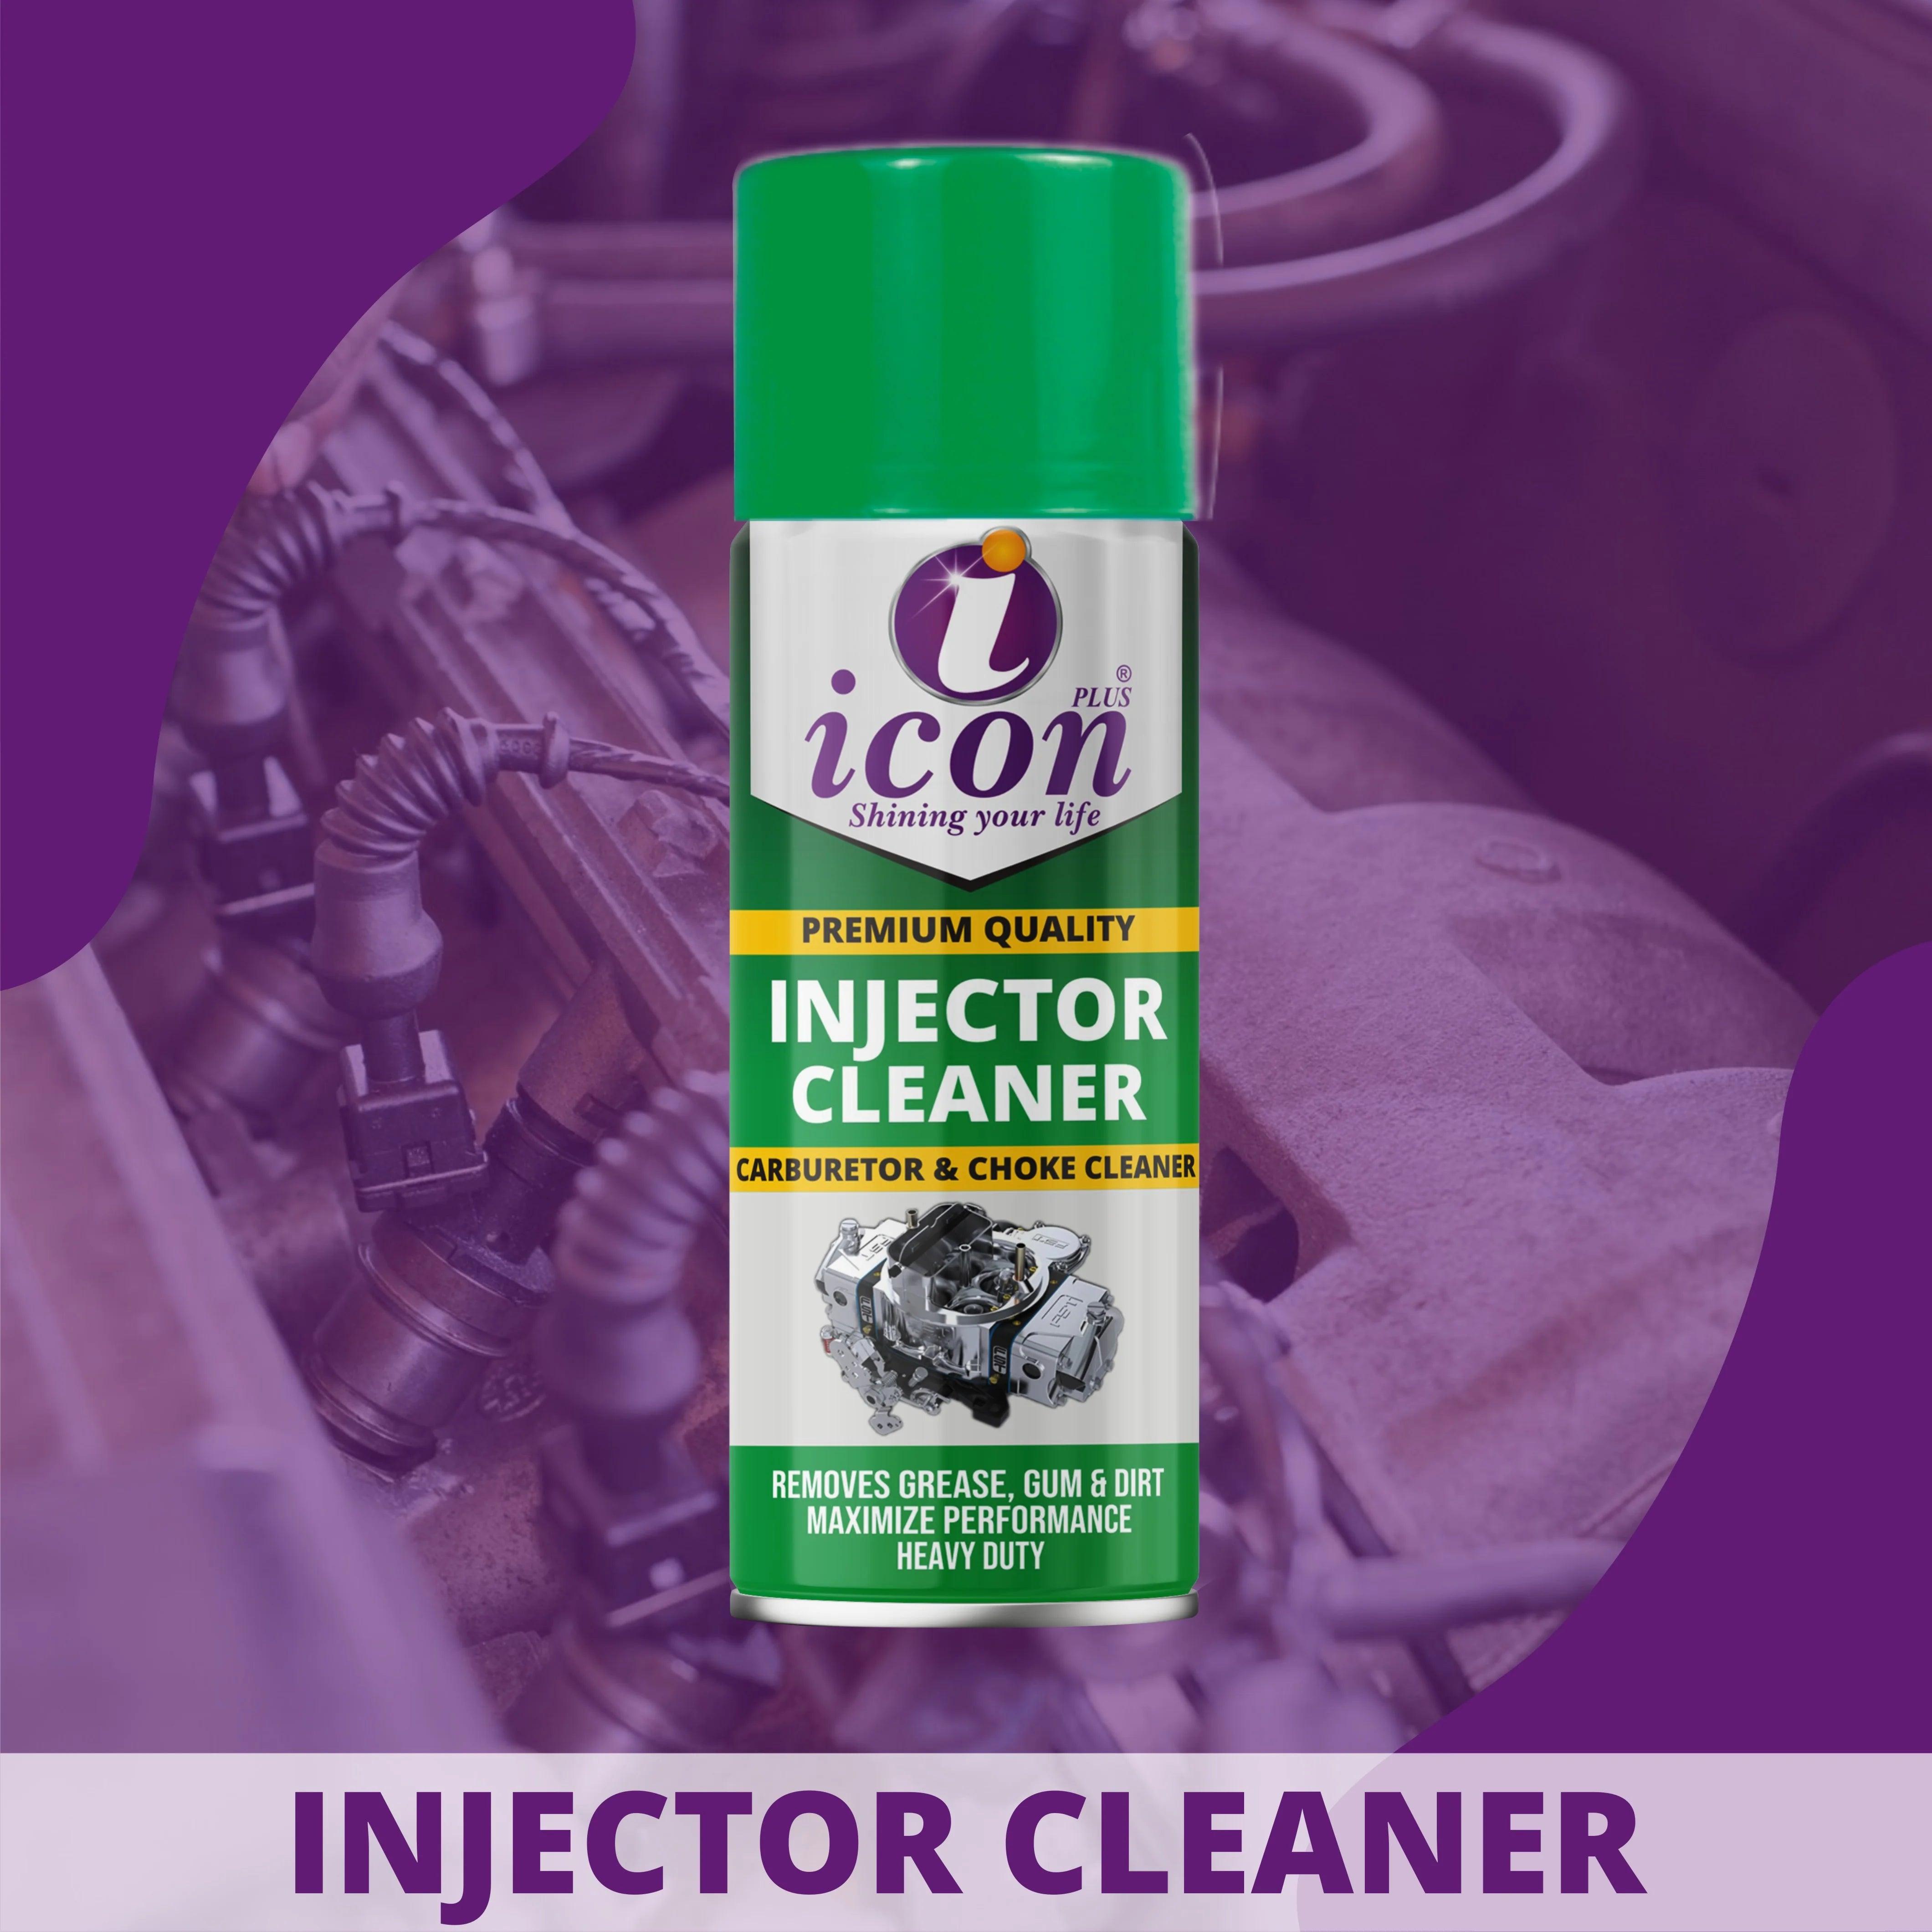 INJECTOR CLEANER - Icon Plus International